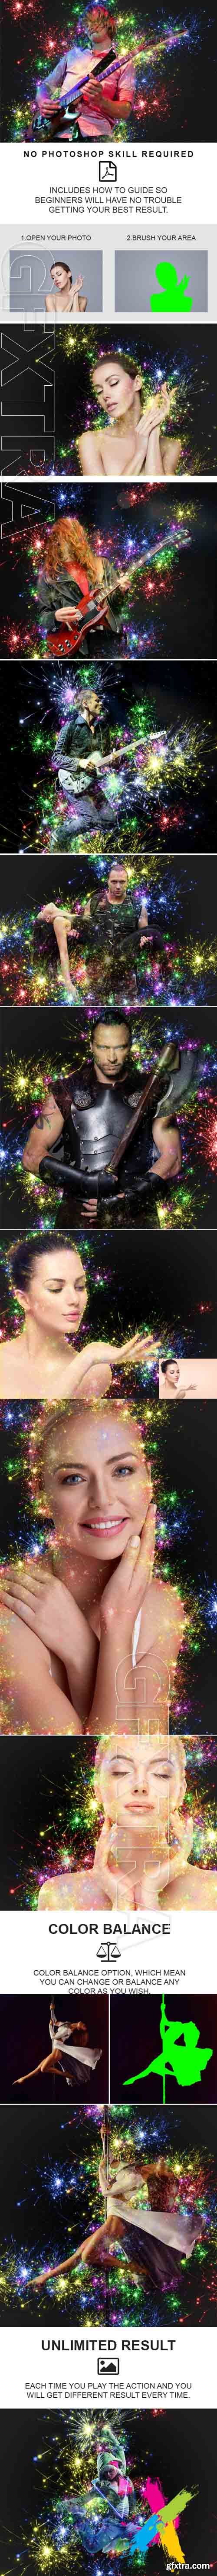 Graphicriver - Twinkle Photoshop Action 20255519